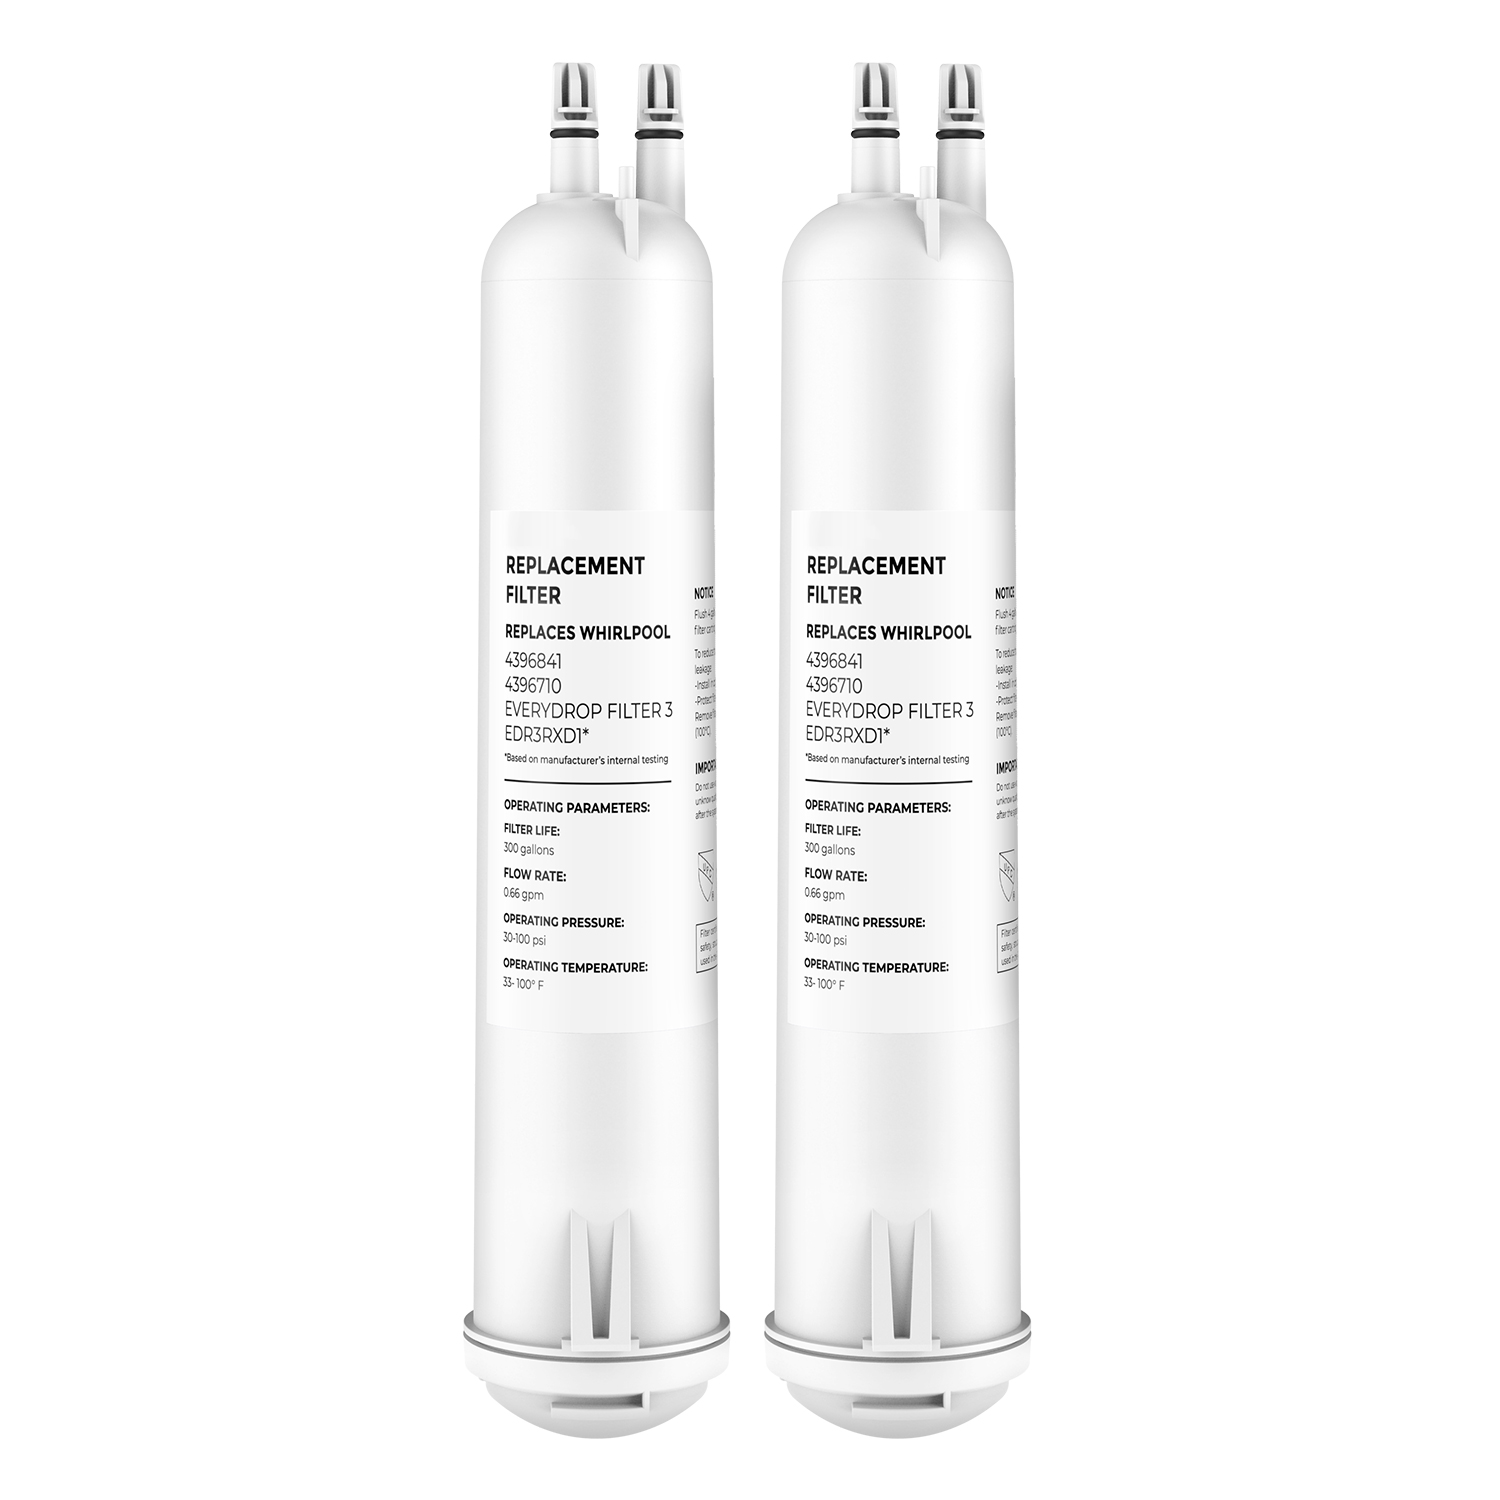 Compatible EDR3RXD1,4396841,4396710,46-9083 Refrigerator Water Filter 3 by Pzfilters 2Pcs